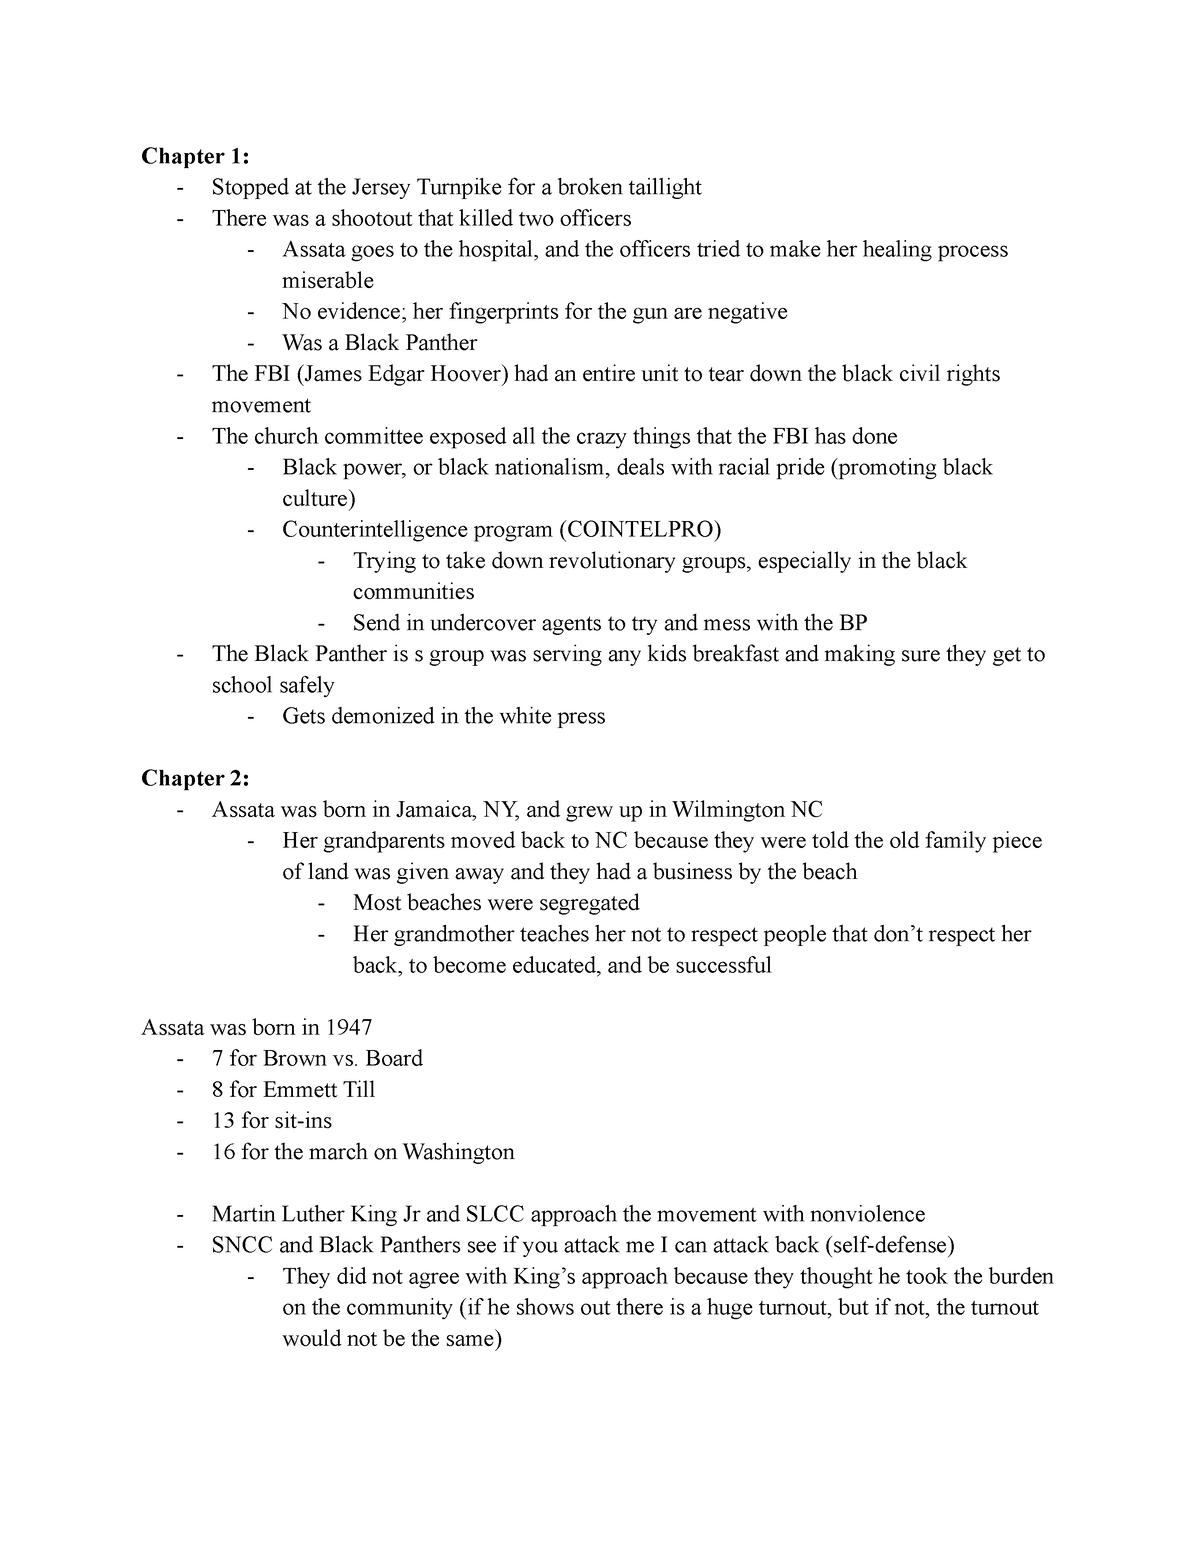 Assata 2 Notes for one of the readings Chapter 1: Stopped at the